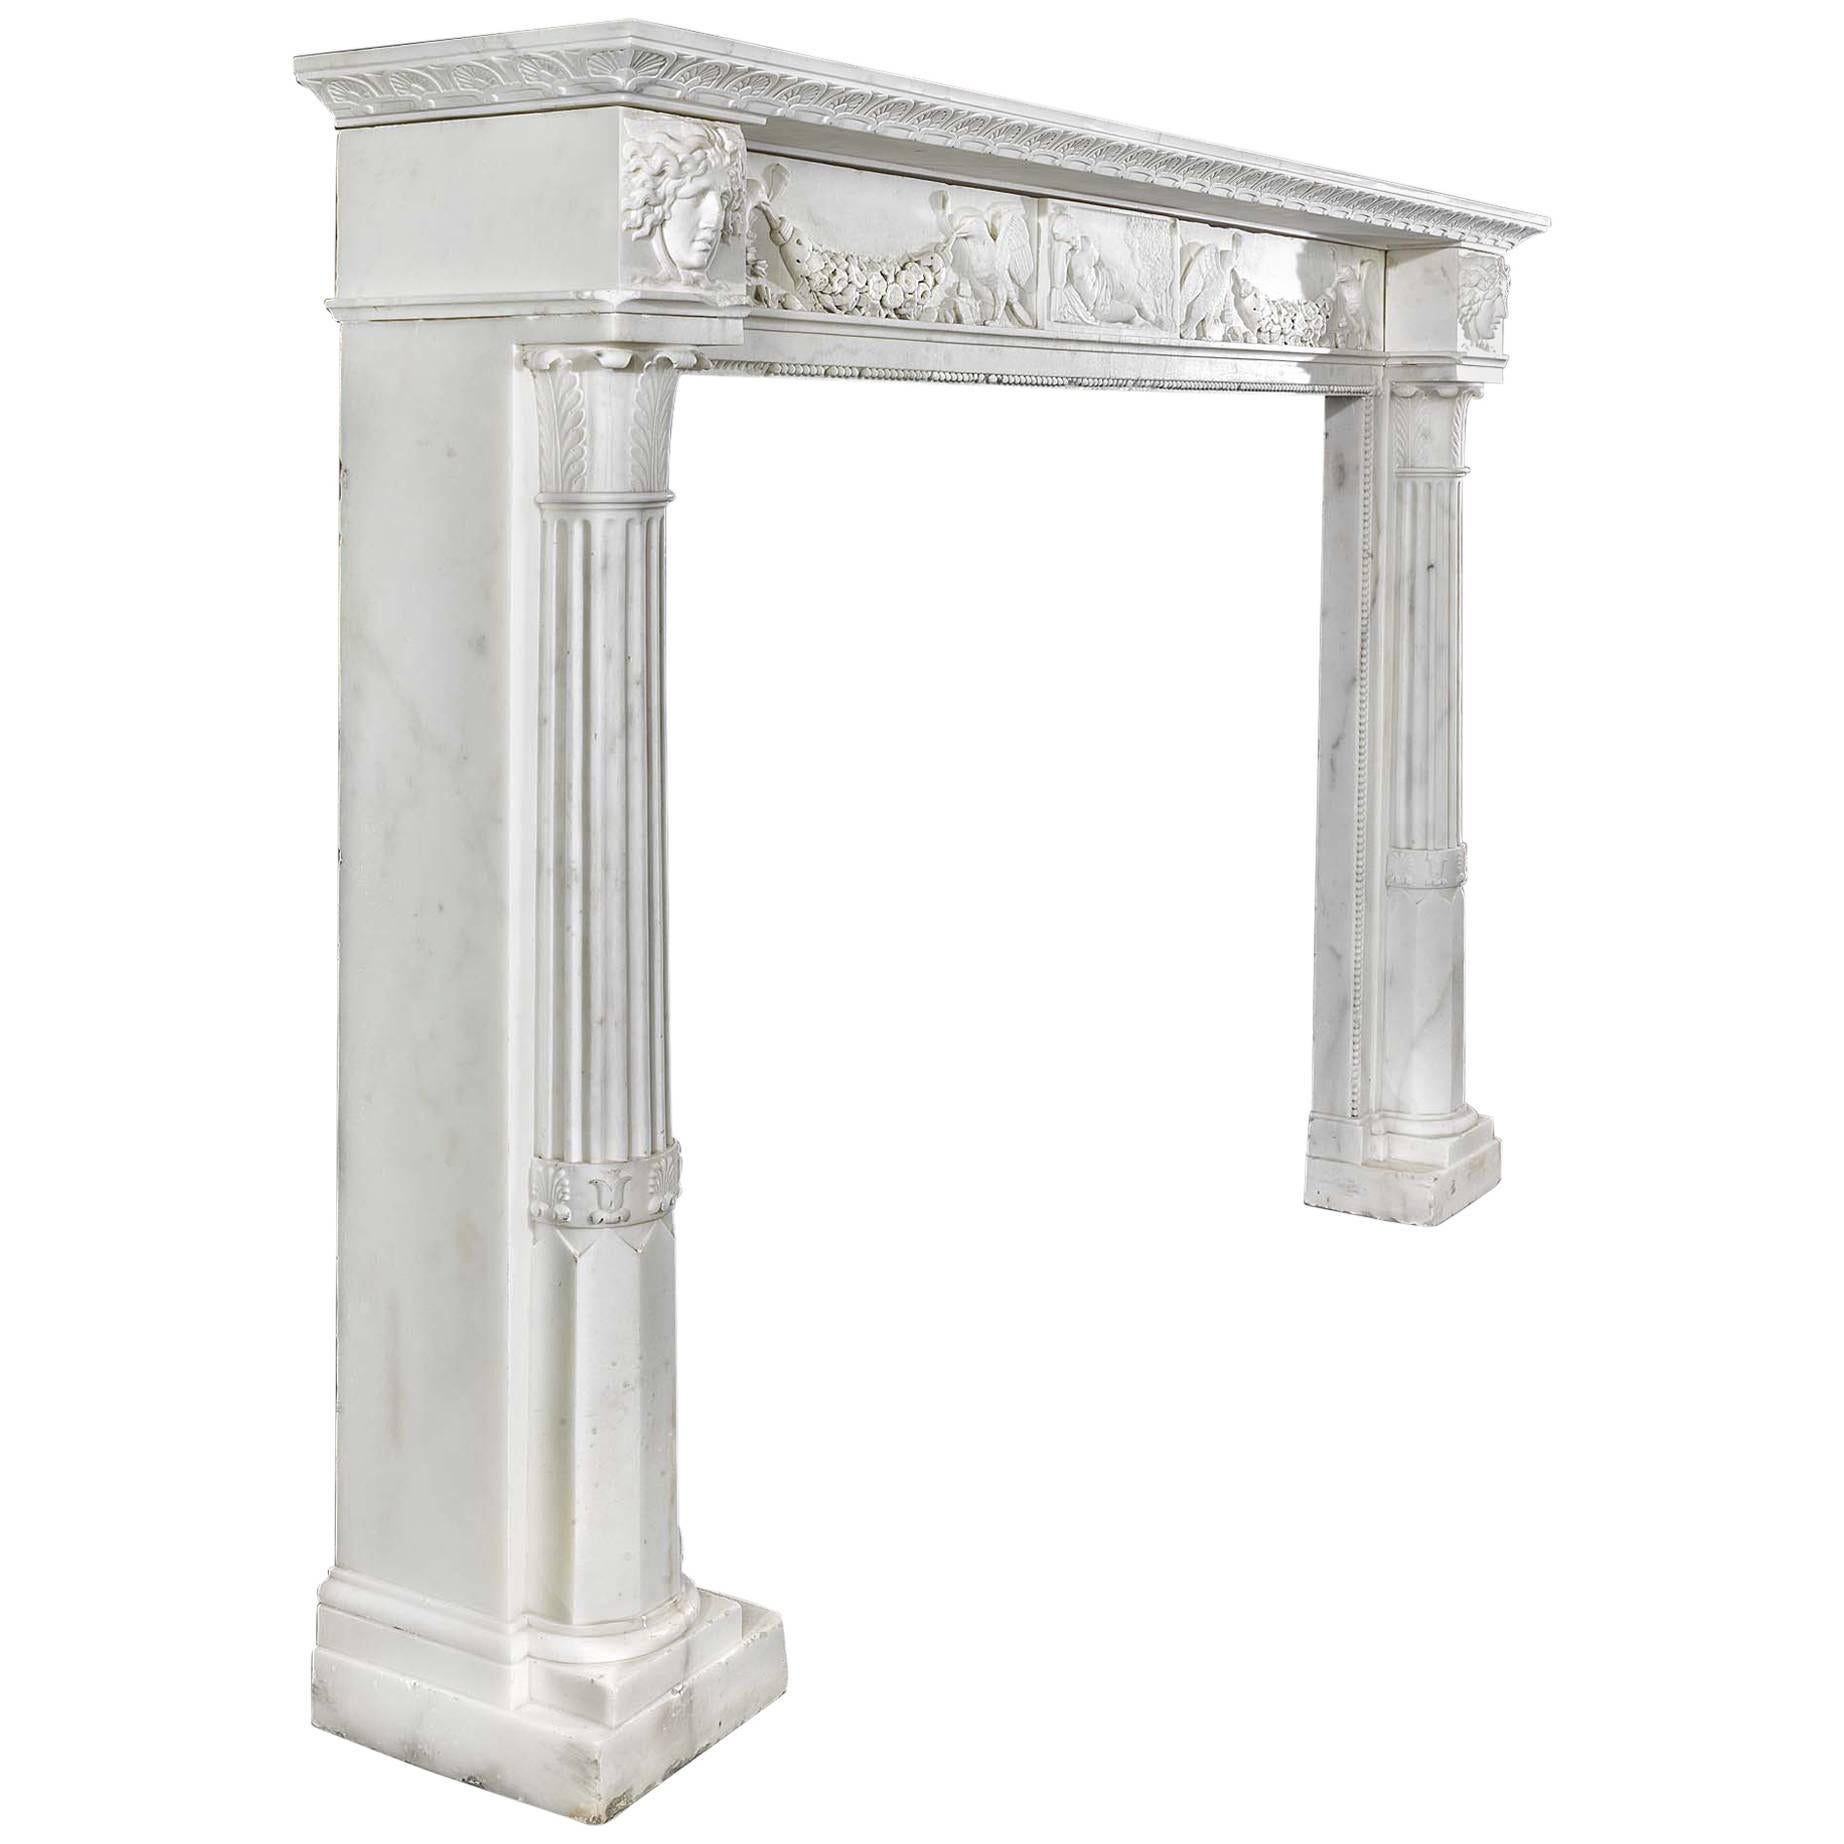 A fine and elegant Italian carrara marble antique chimneypiece with a richly embellished undershelf. The recessed frieze has a central panel carved with a reclining Venus, either side of which are two pairs of birds, each pair bearing a garland in